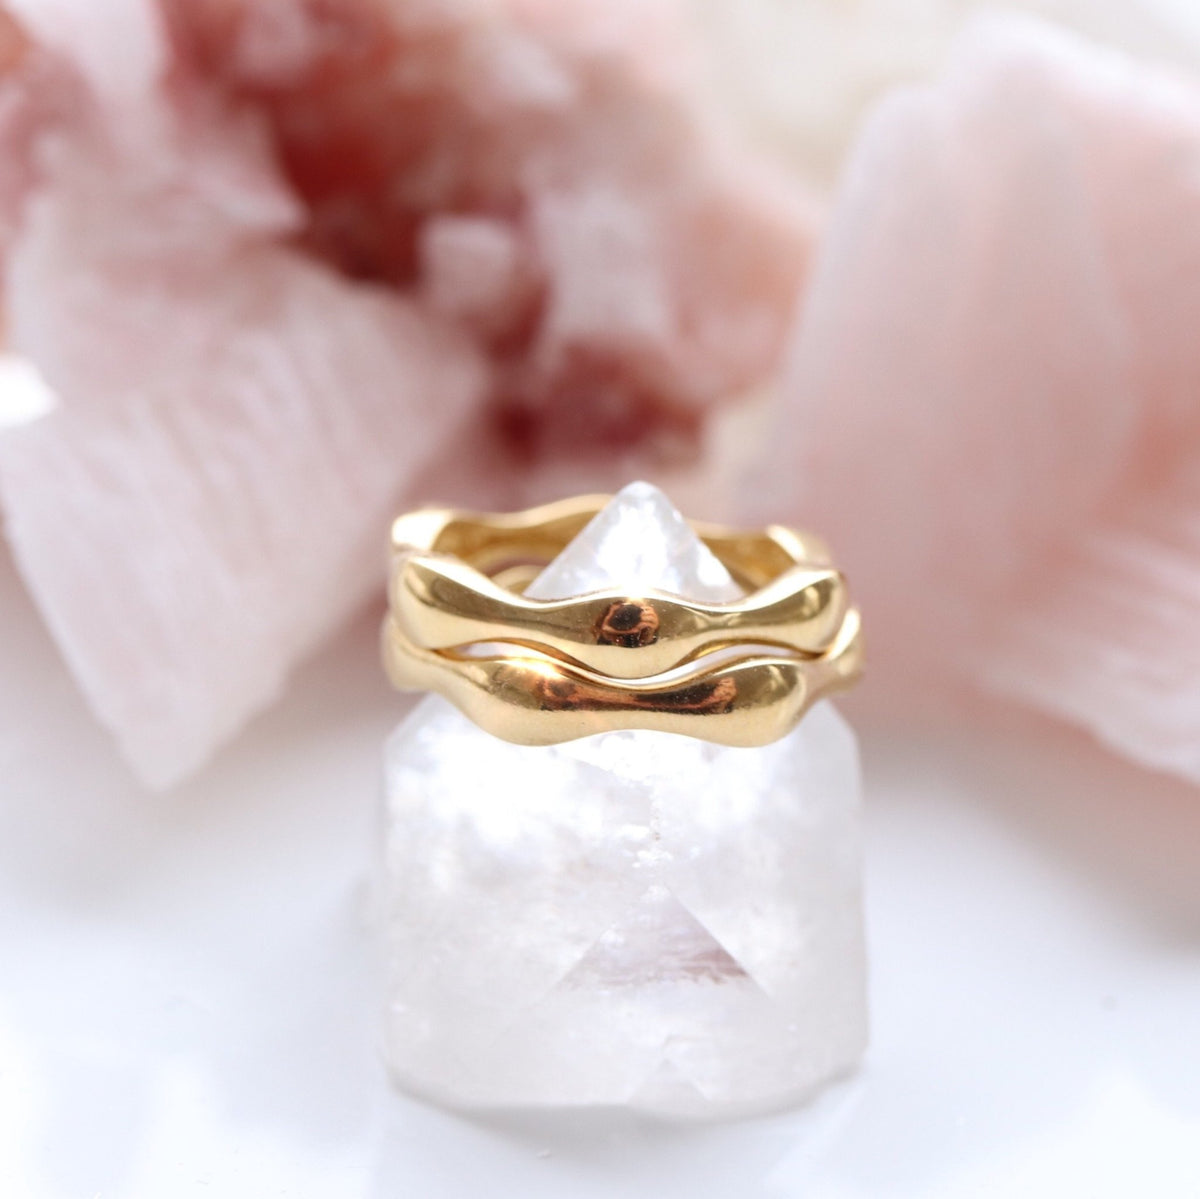 KIND BAND RING - GOLD - SO PRETTY CARA COTTER